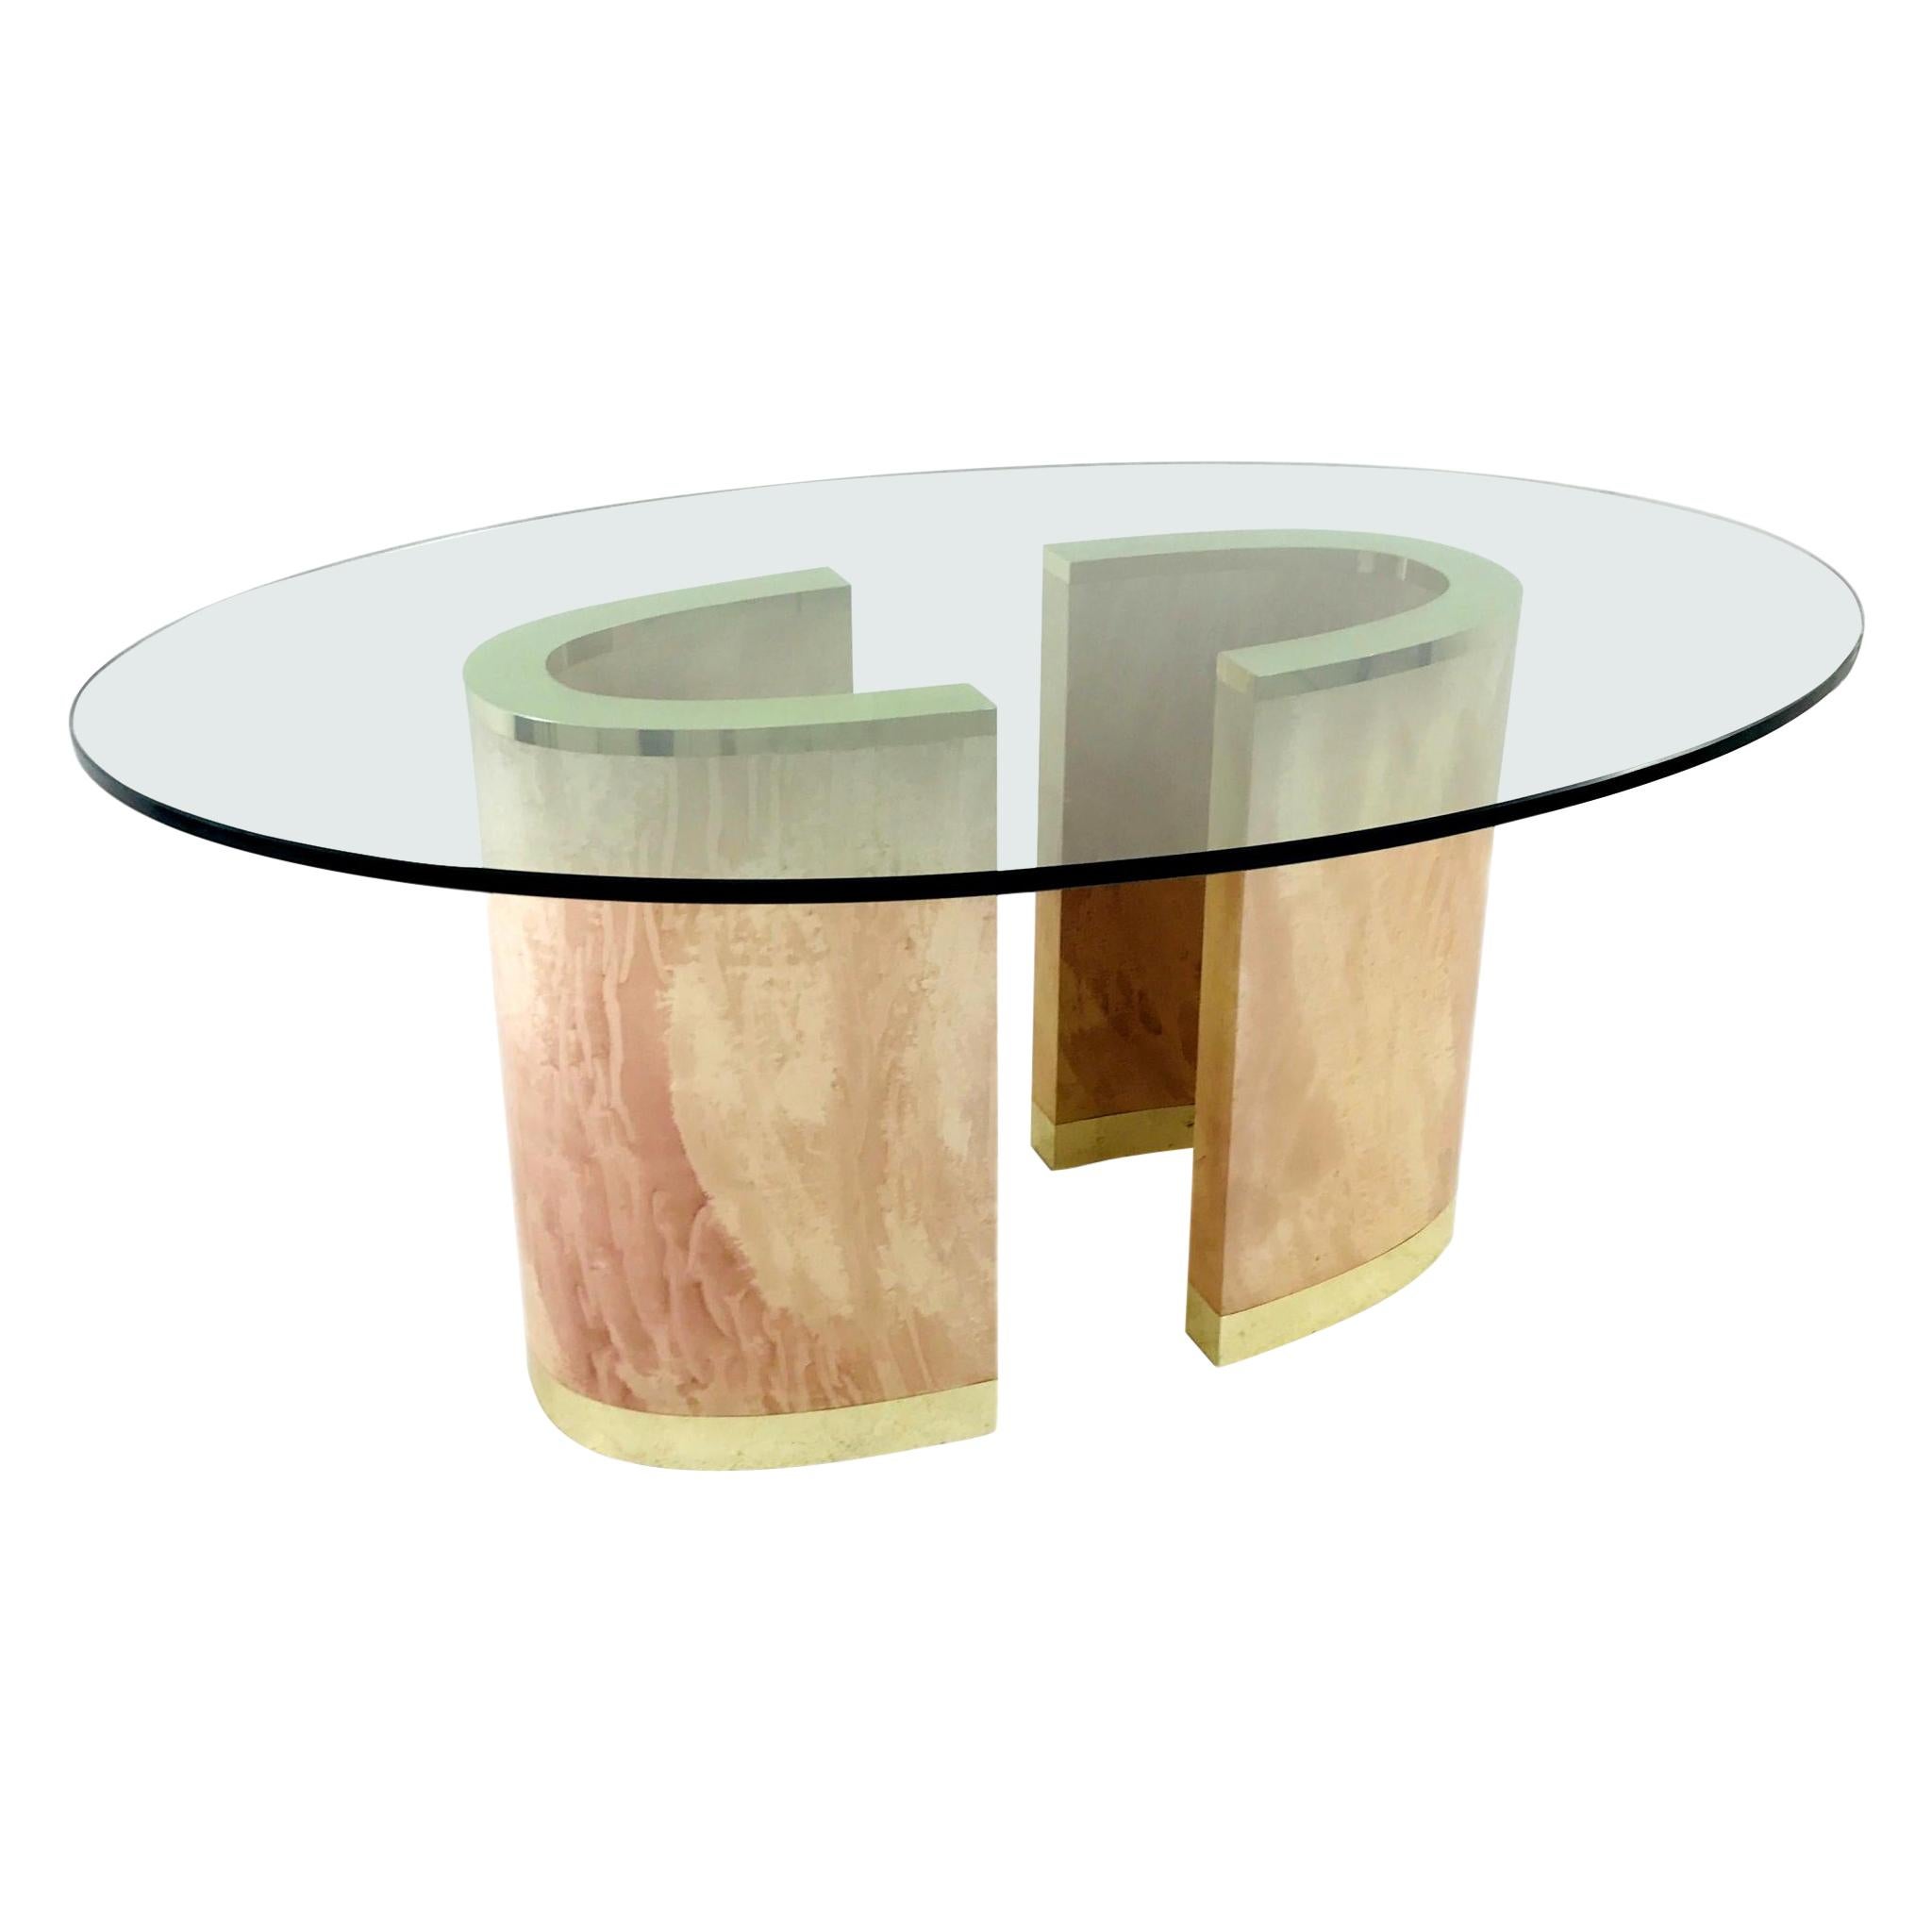 2-Piece Pedestal Dining Table with Brass Plinth and Glass Top